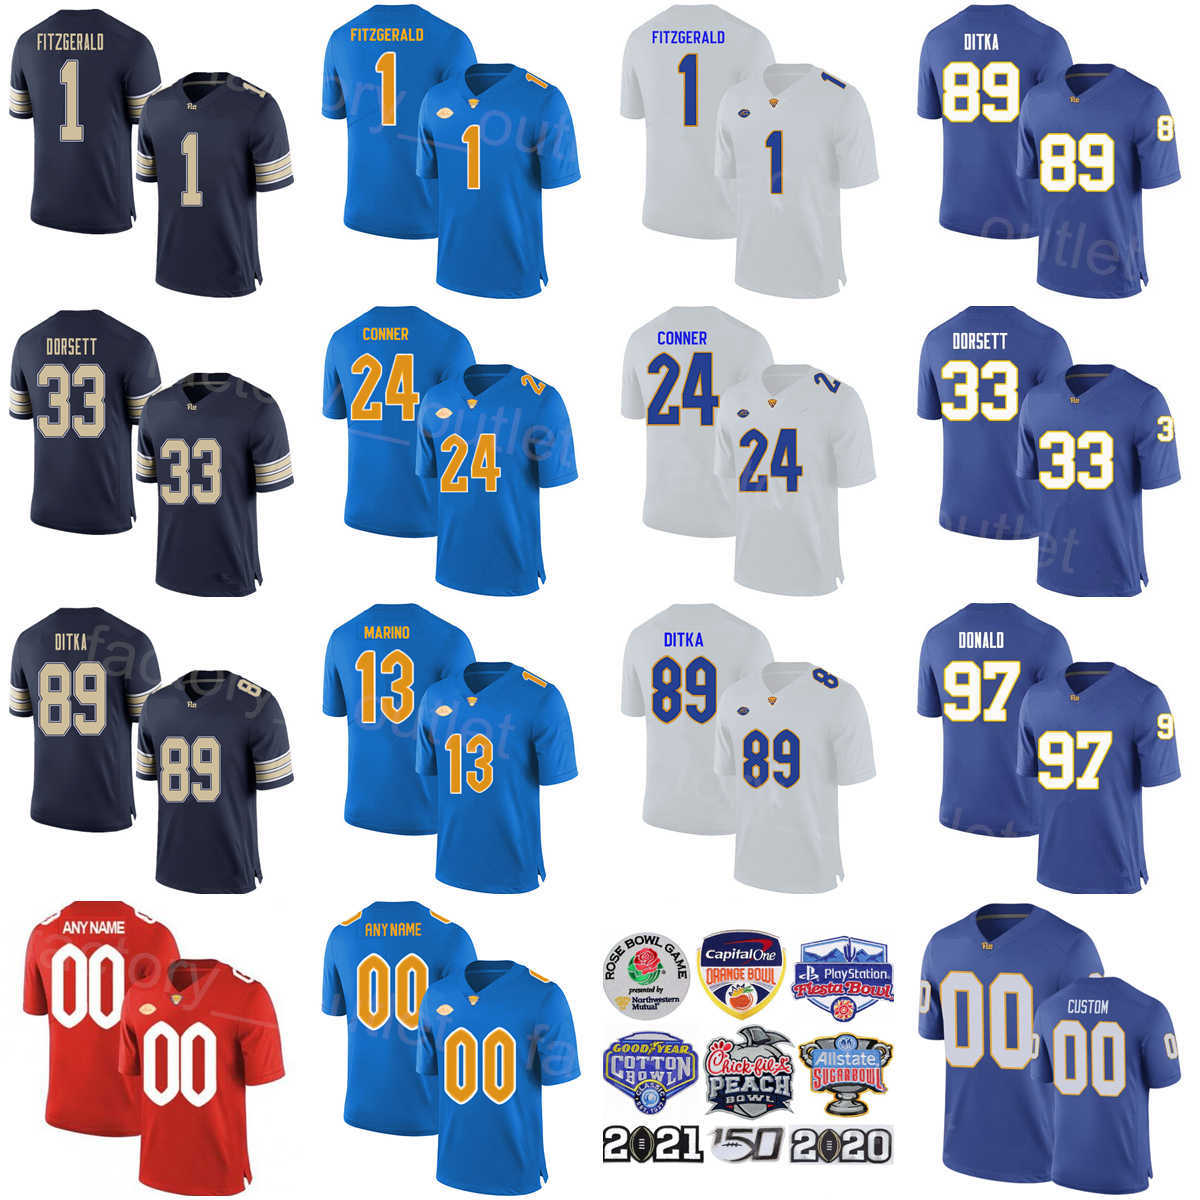 

NCAA Pittsburgh Panthers Football College 1 Larry Fitzgerald Jersey 33 Tony Dorsett 13 Dan Marino 24 James Conner 89 Mike Ditka 97 Aaron Donald University Stitched, White